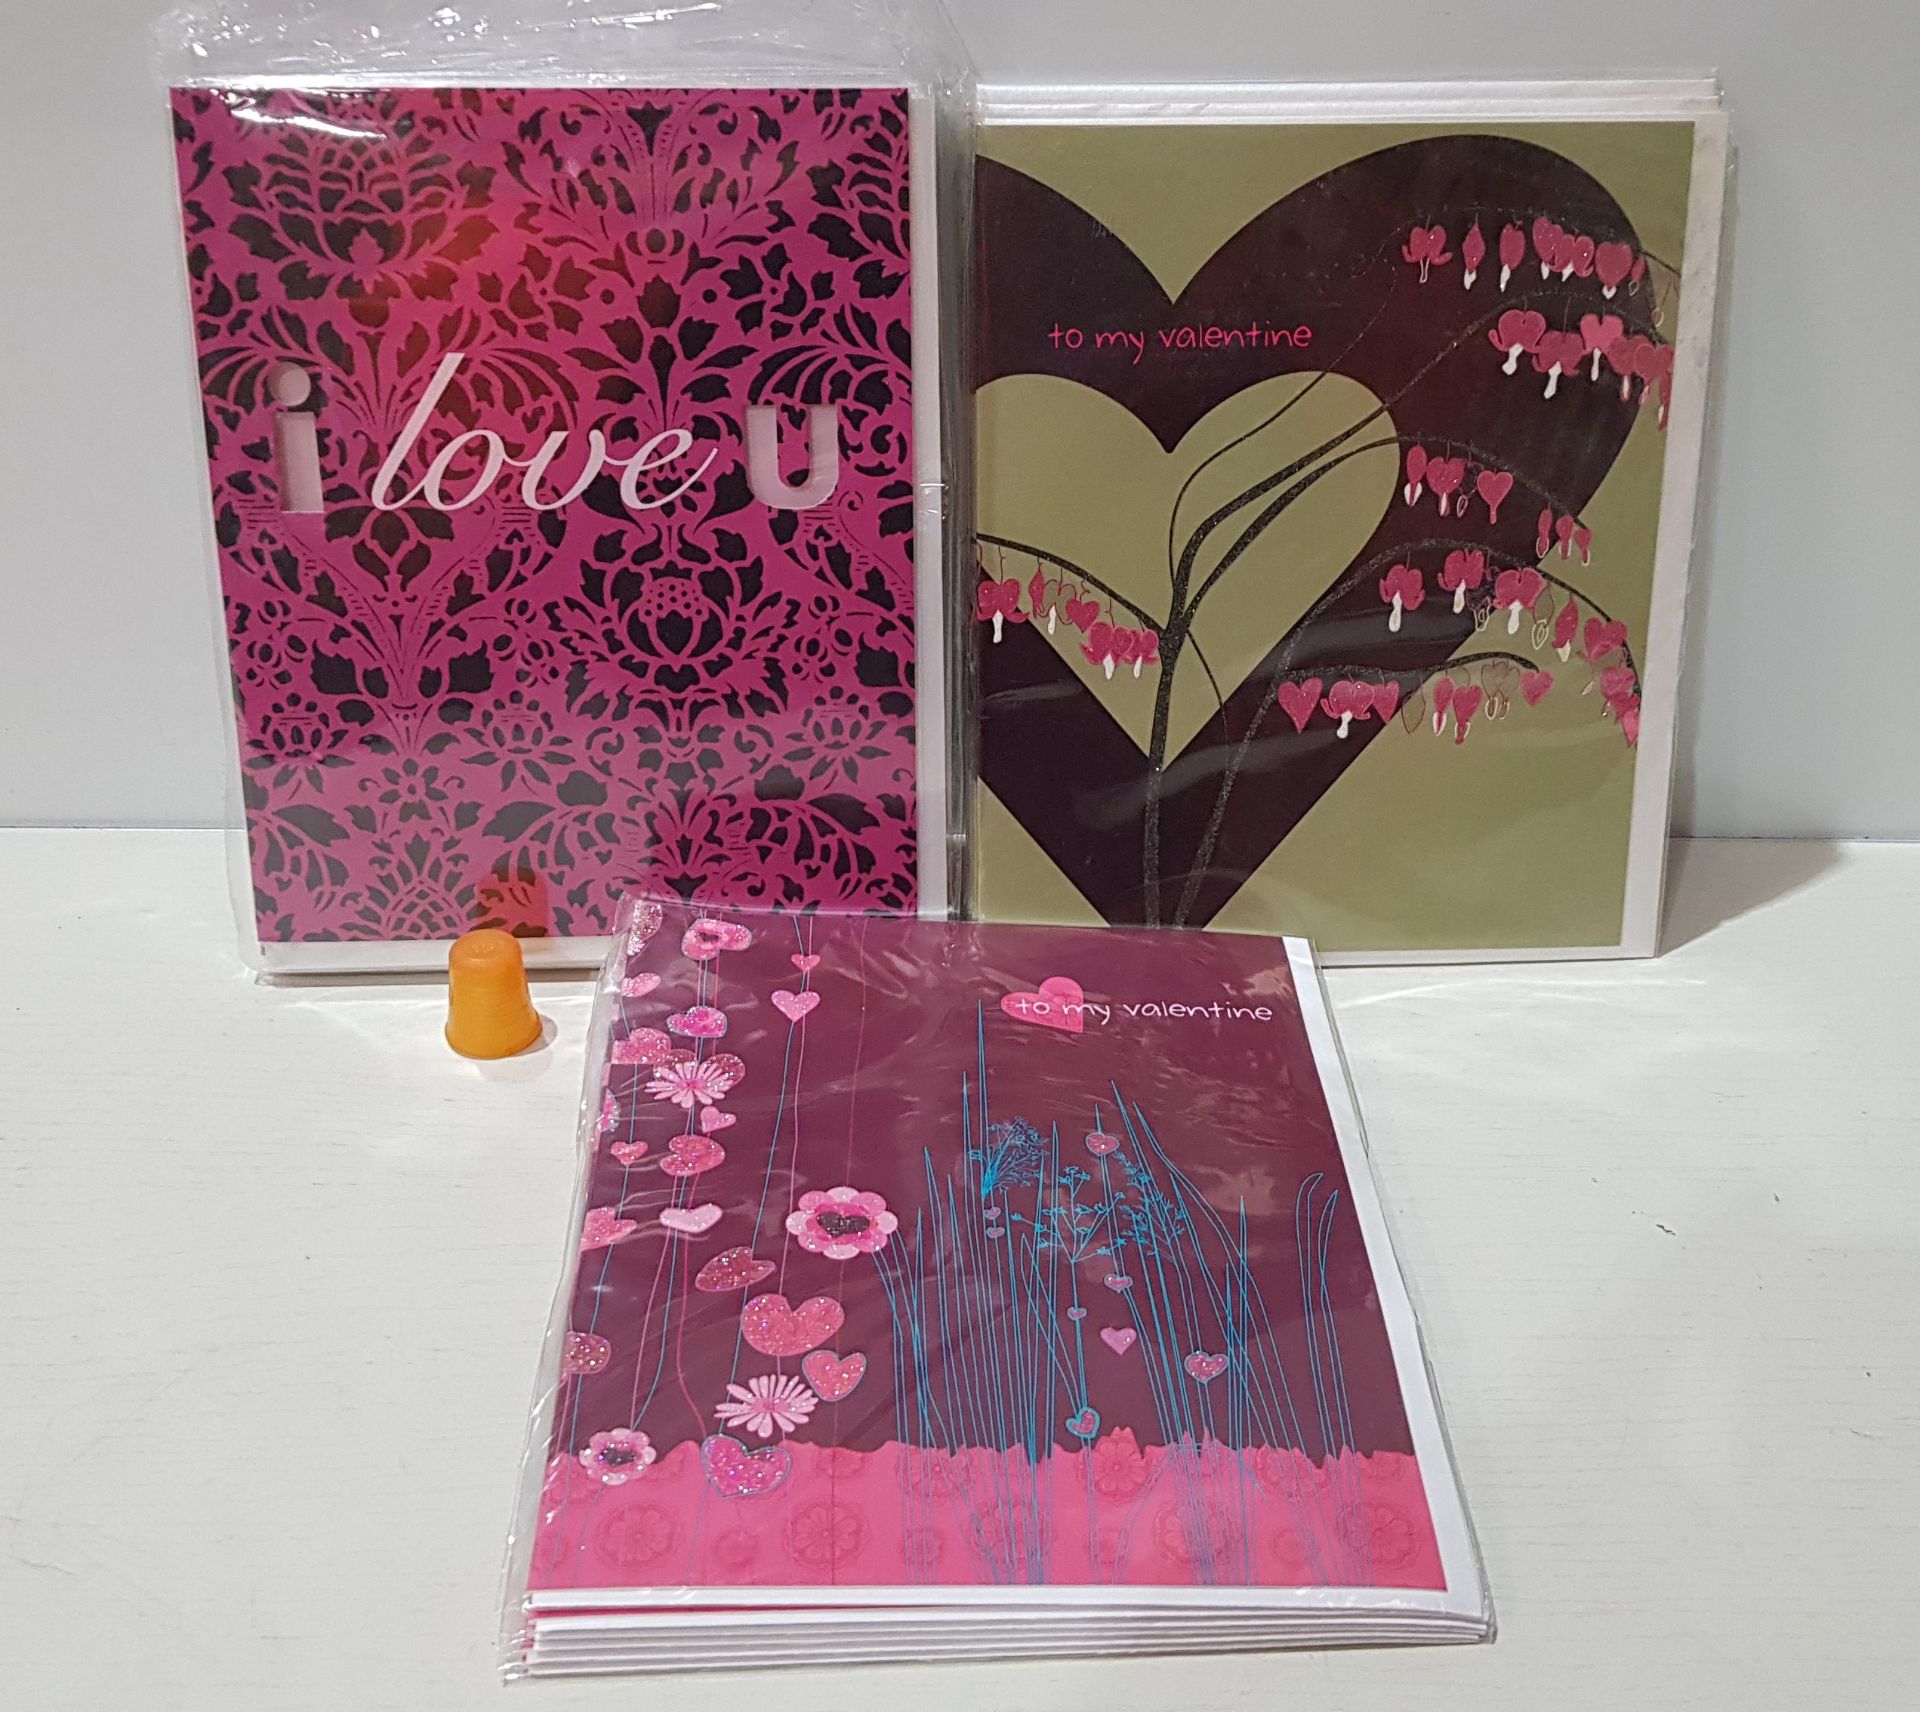 2000+ BRAND NEW VALENTINES DAY CARDS I.EI LOVE YOU- TO MY VALENTINE ETC -ETC - IN 4 BOXES WITH